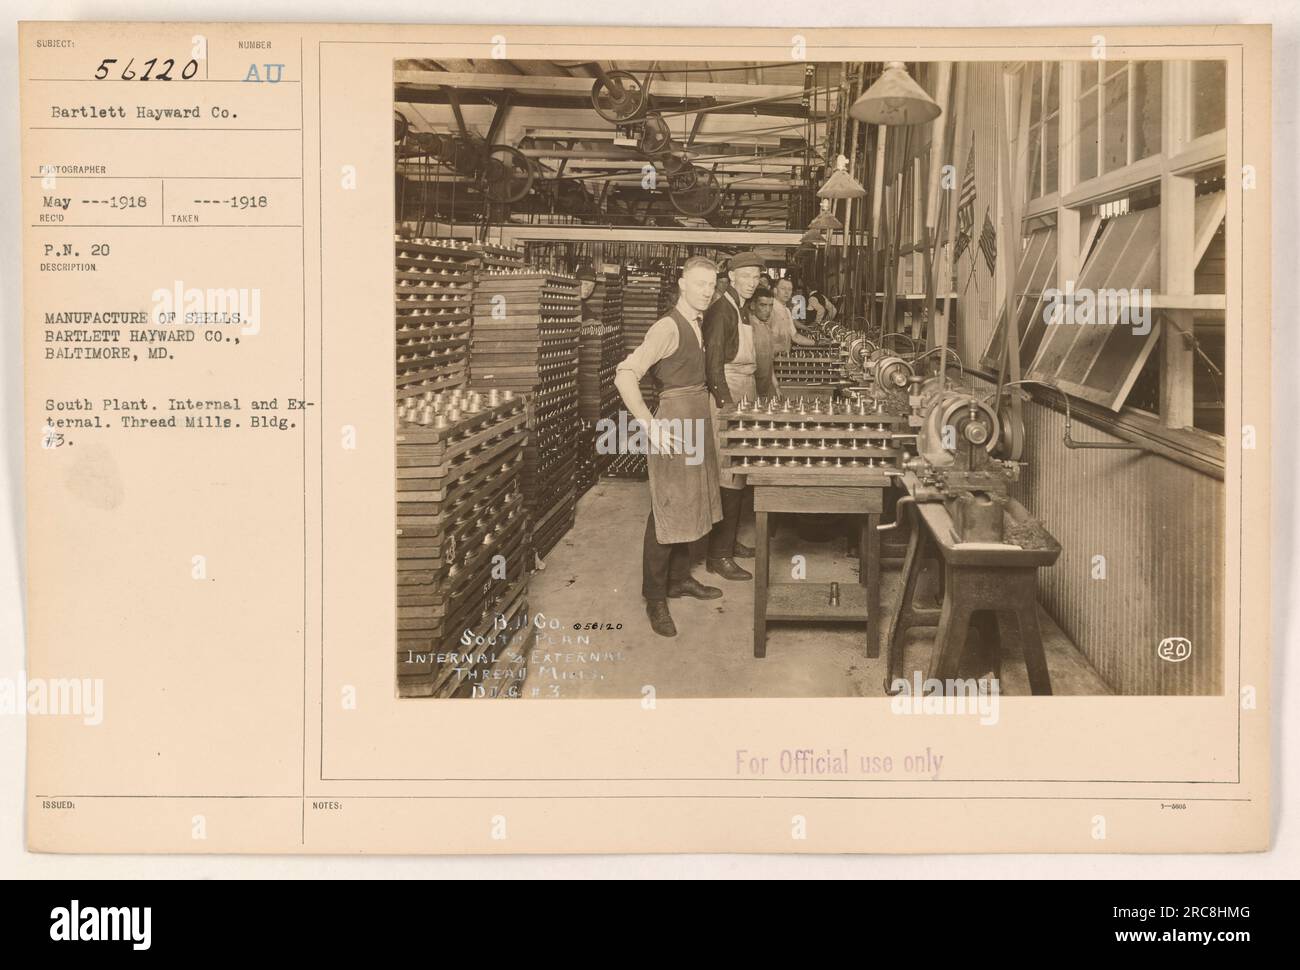 'Image depicting the manufacture of shells at Bartlett-Hayward Co., Baltimore, Md. in their South plant. The photo shows the internal and external parts of the shell production process, particularly the thread mills in Building #3.' Stock Photo